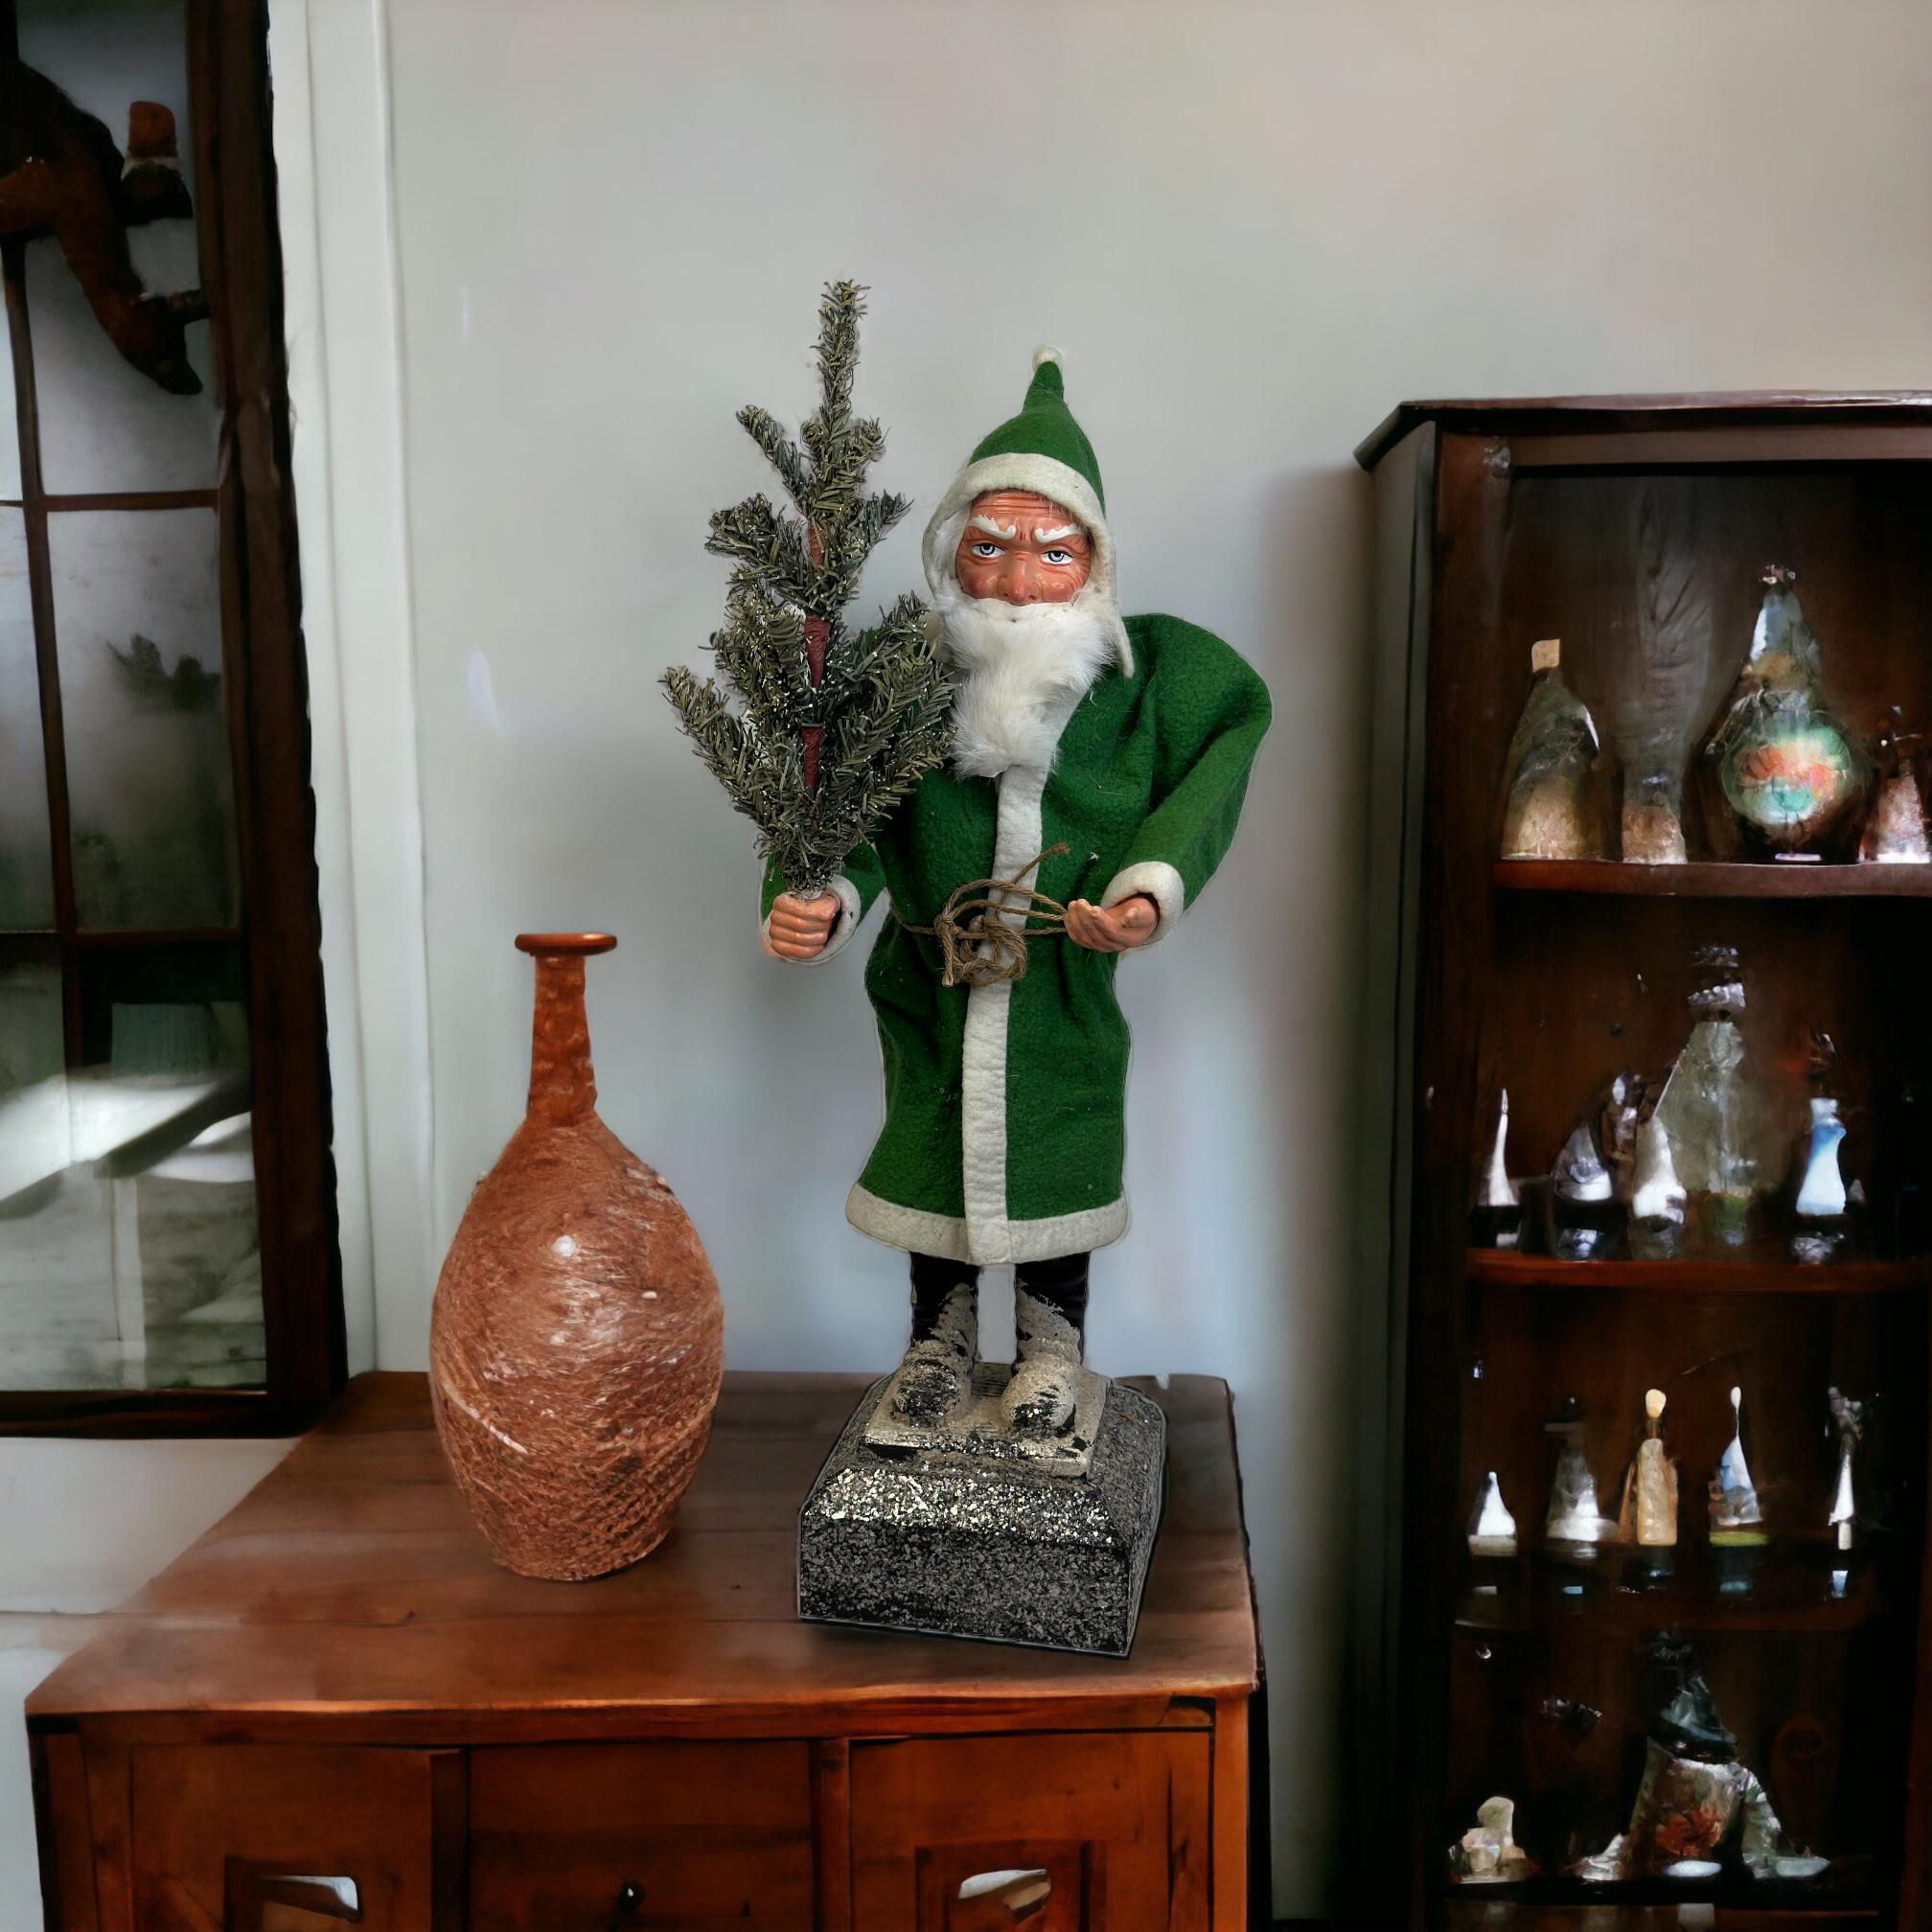 This vintage Belsnickle Santa Claus candy container made of composition, cardboard and wood was made in the 20th century and is a charming addition to any Christmas collection. Made of wire and paper, the Christmas tree and composite material give